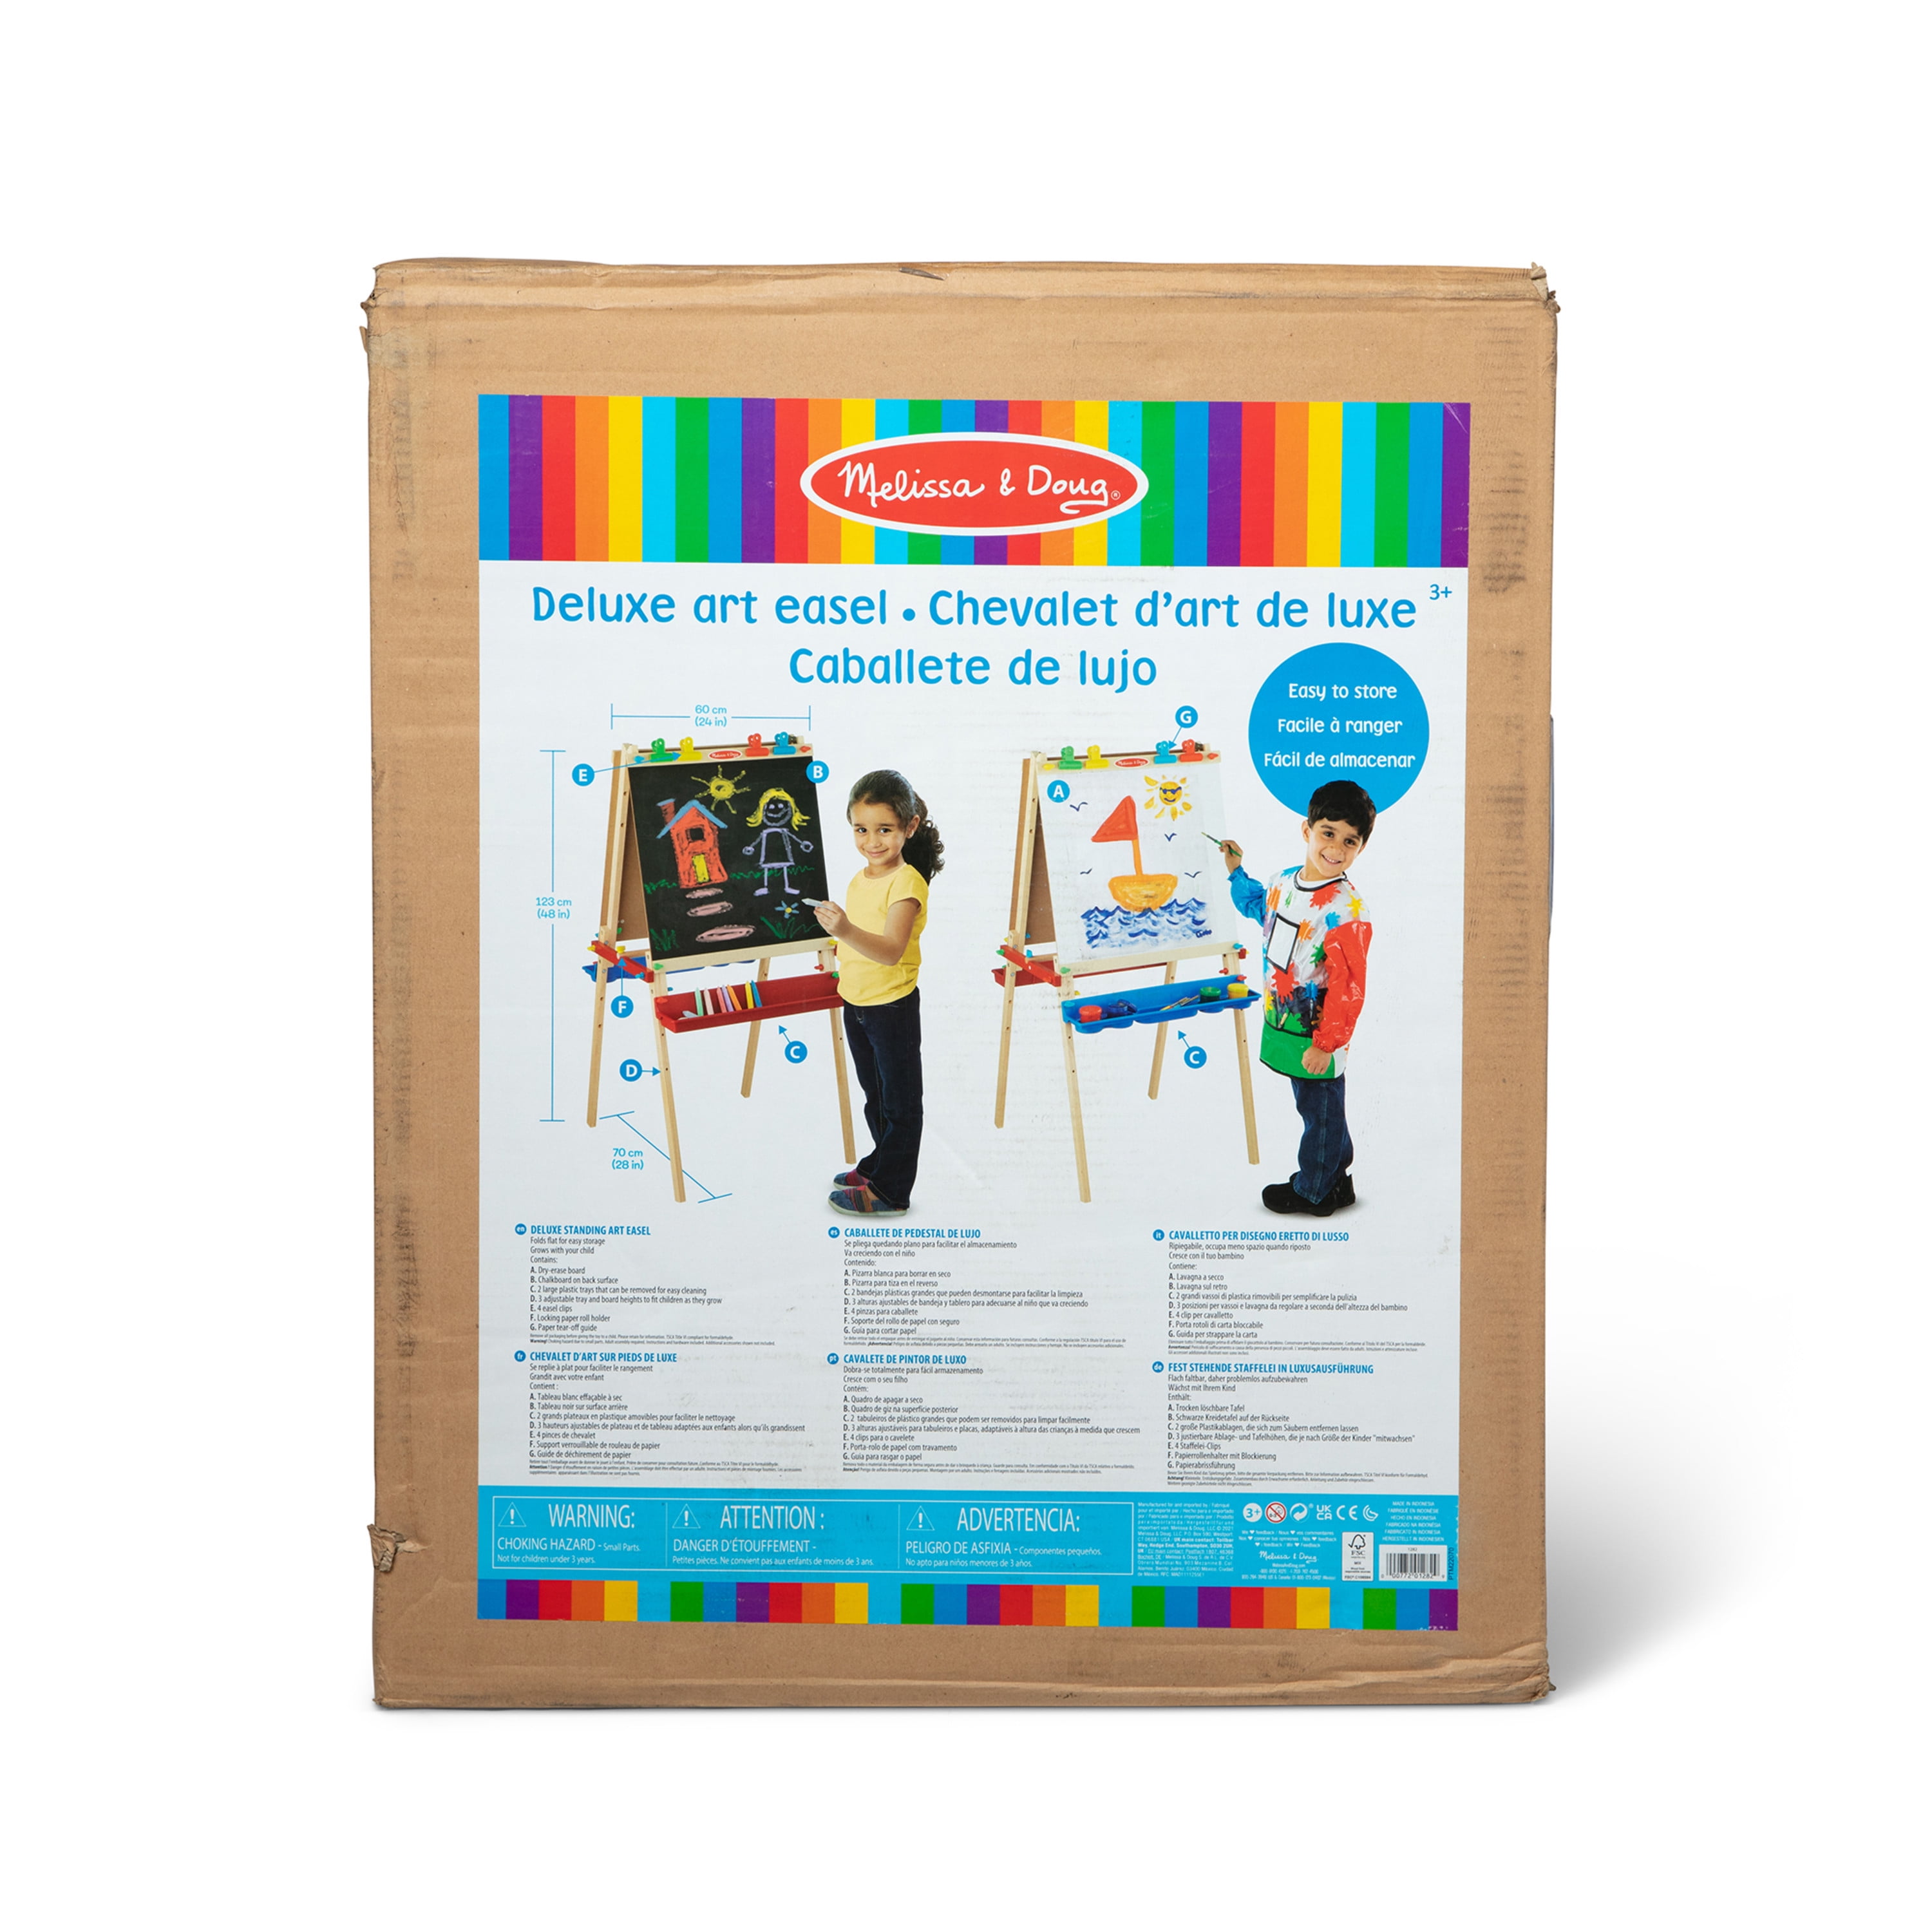 Melissa and Doug Deluxe Standing Easel - baby & kid stuff - by